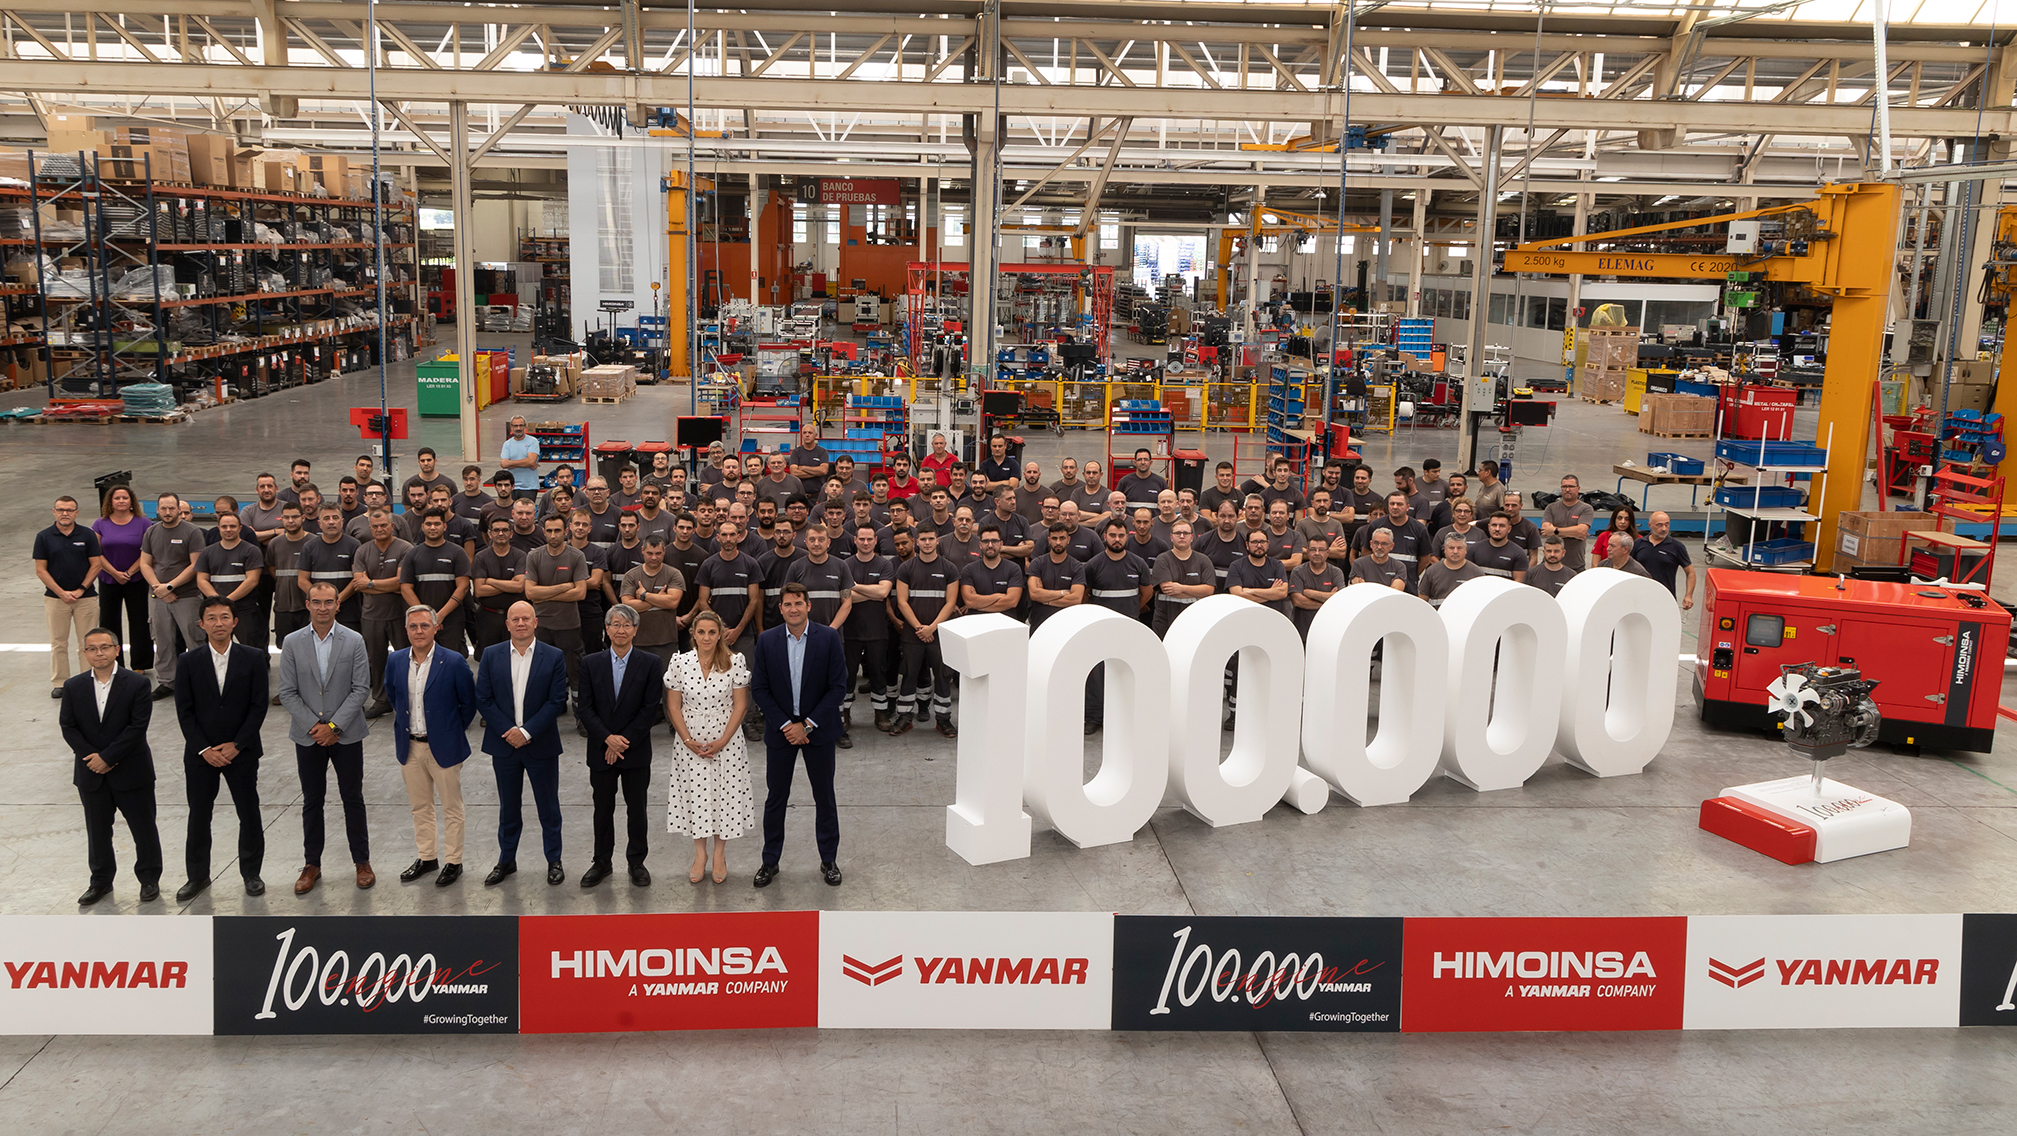 HIMOINSA achieves a new milestone: the company has now produced 100,000 generator sets with Yanmar engines